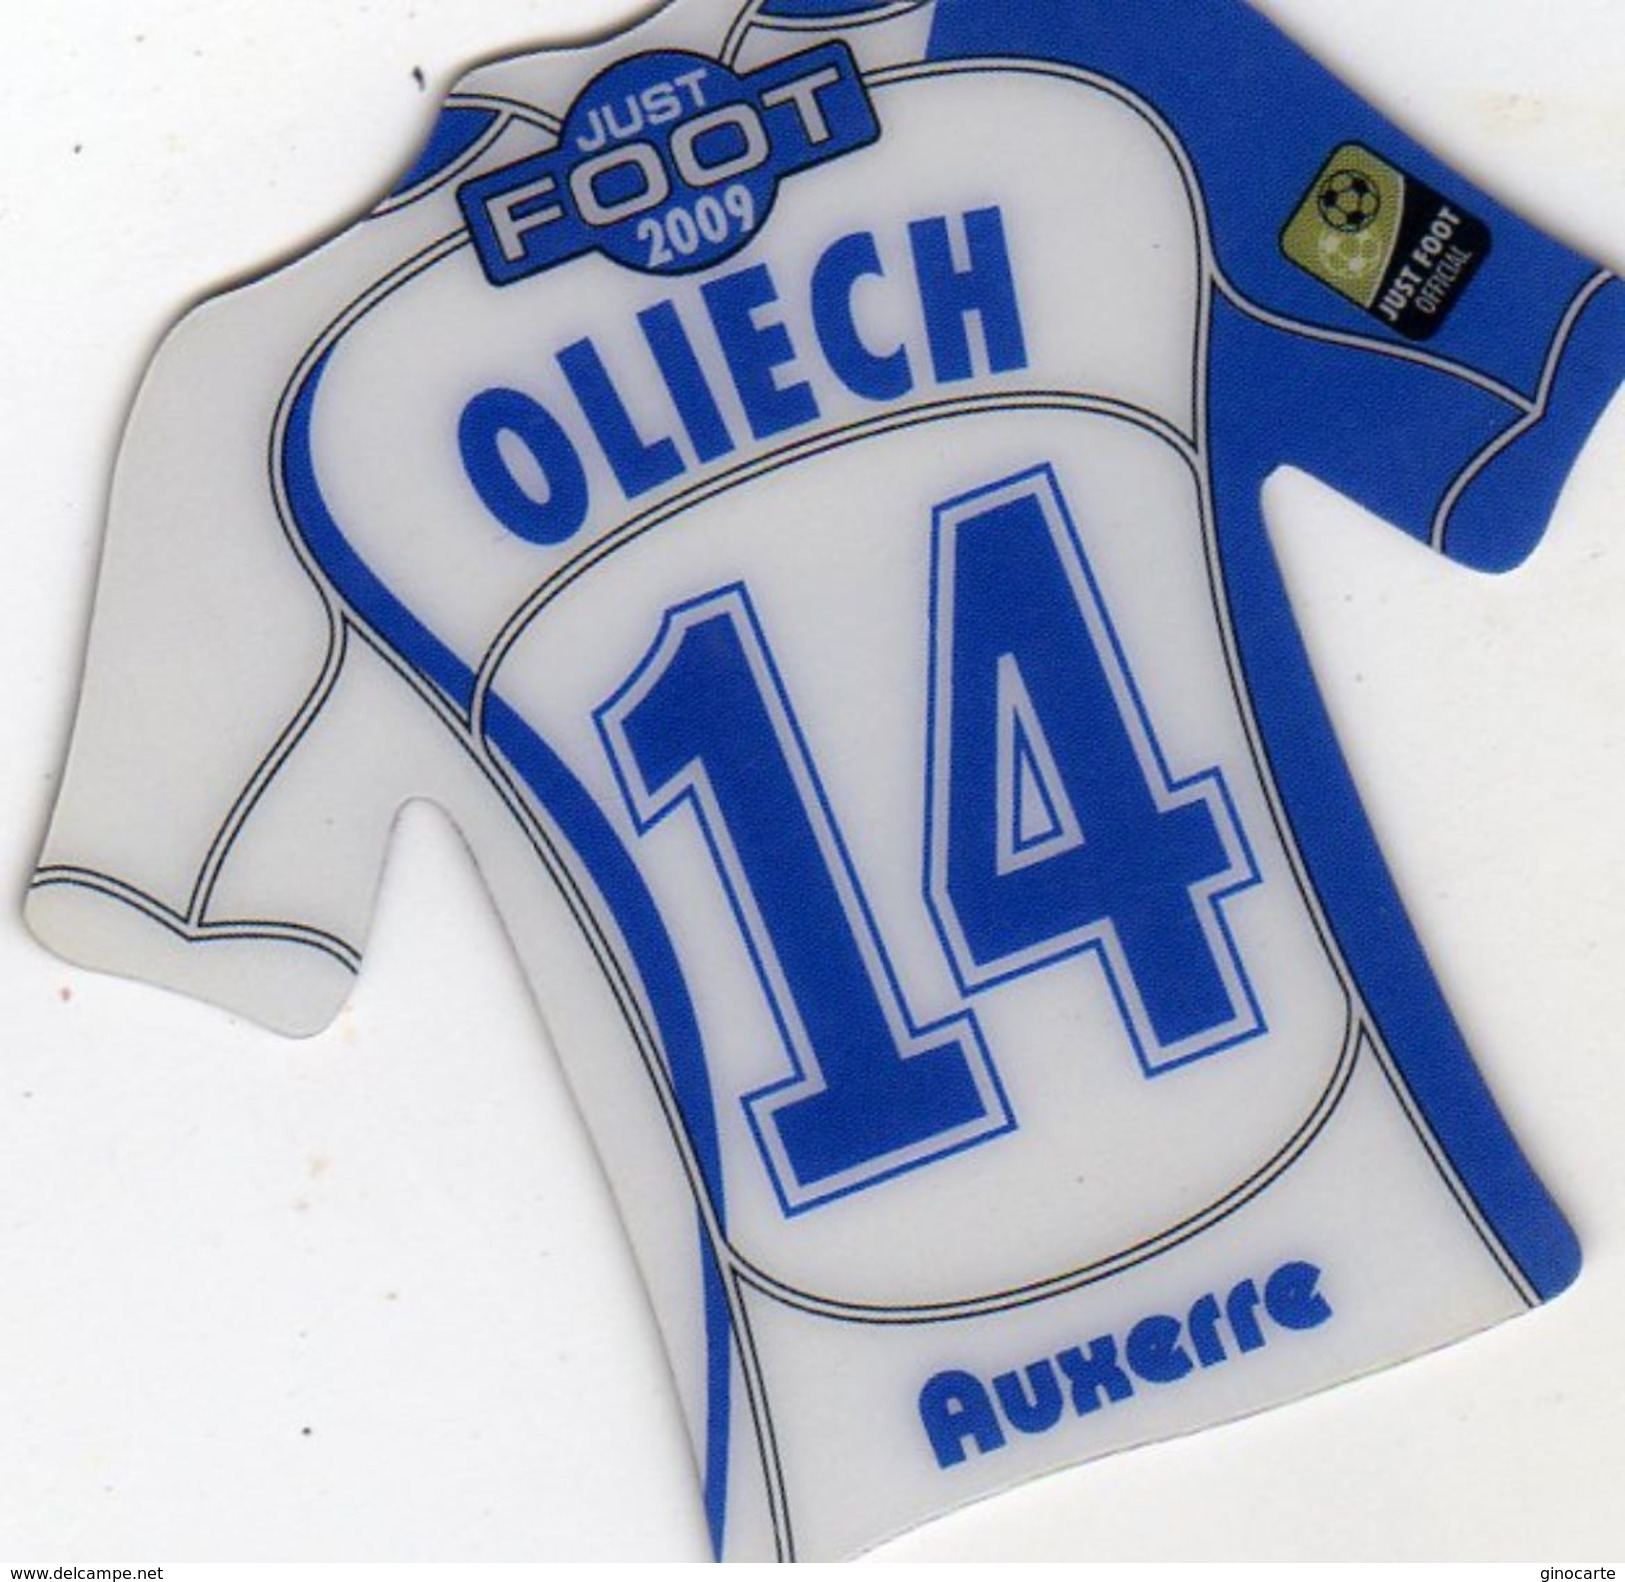 Magnet Magnets Maillot De Football Pitch Auxerre Oliech 2009 - Deportes